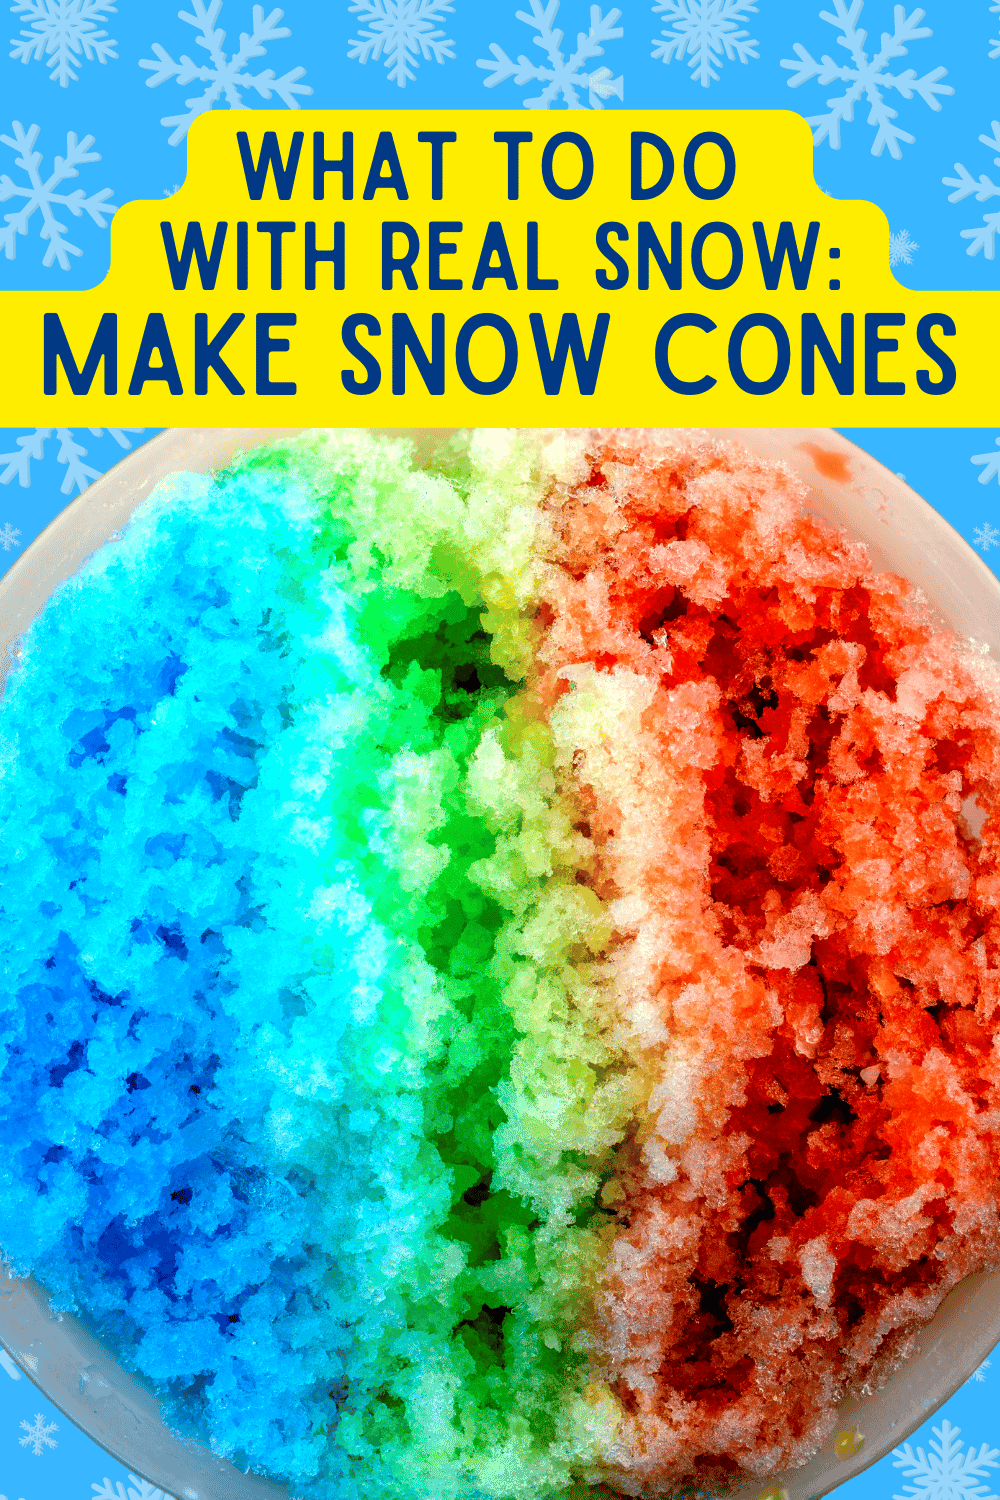 what to make with real snow - make a snow cone out of real snow! text over image of real snow snow cone with different colors of flavors